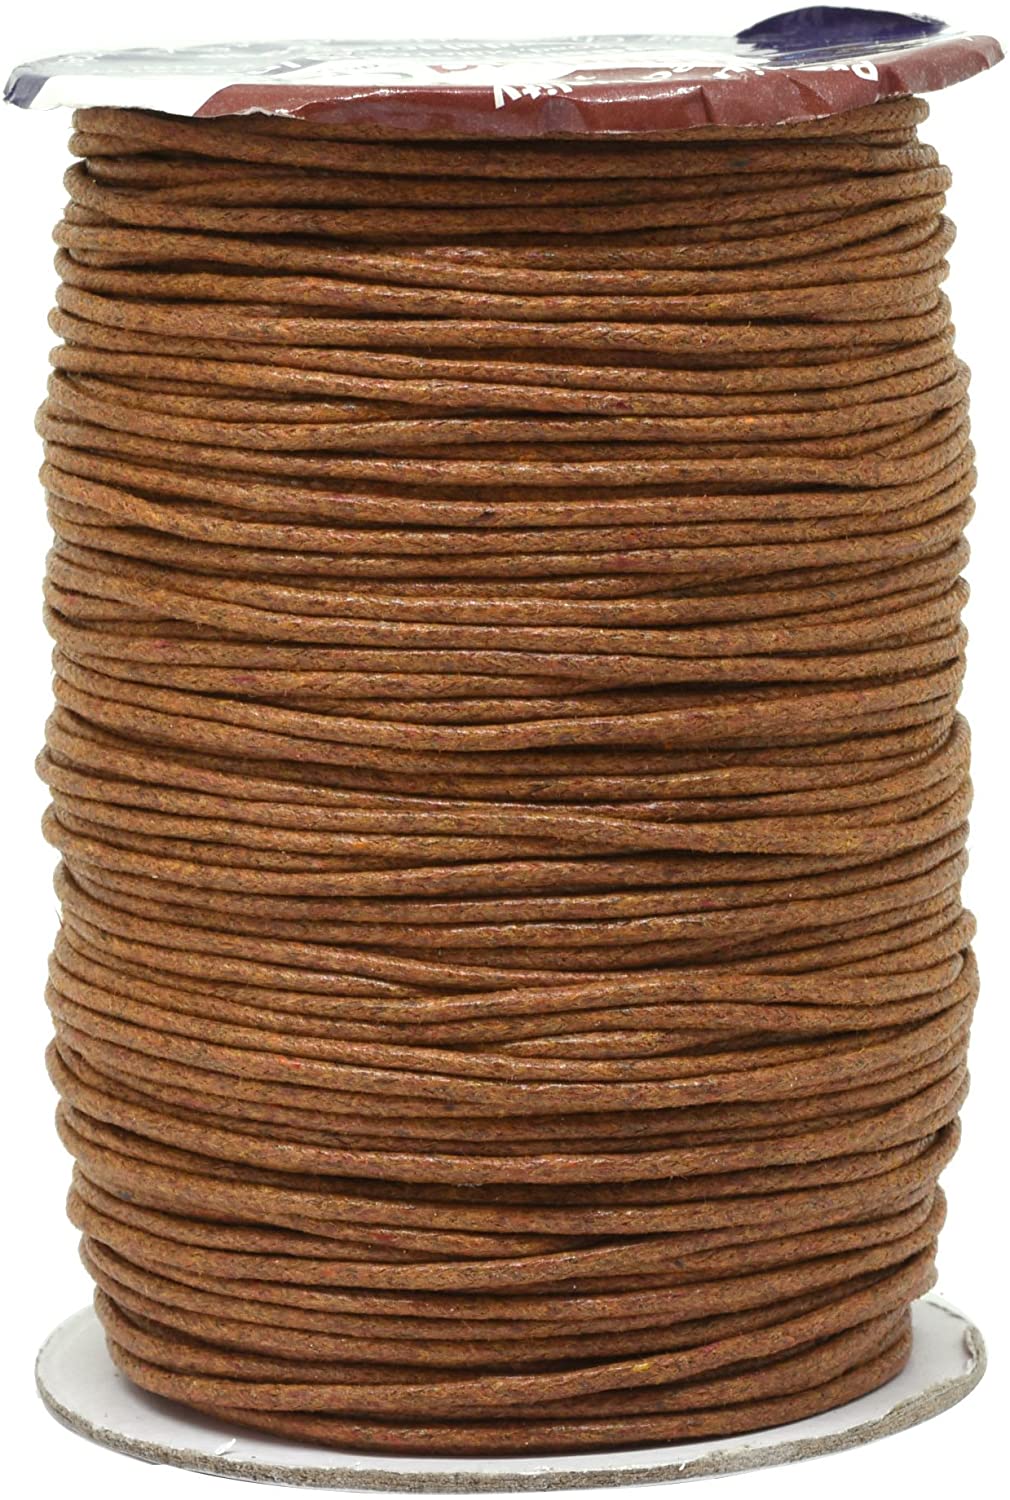 Mandala Crafts 1.5mm 109 Yards Jewelry Making Beading Crafting Macramé Waxed Cotton Cord Rope (Russet Brown)